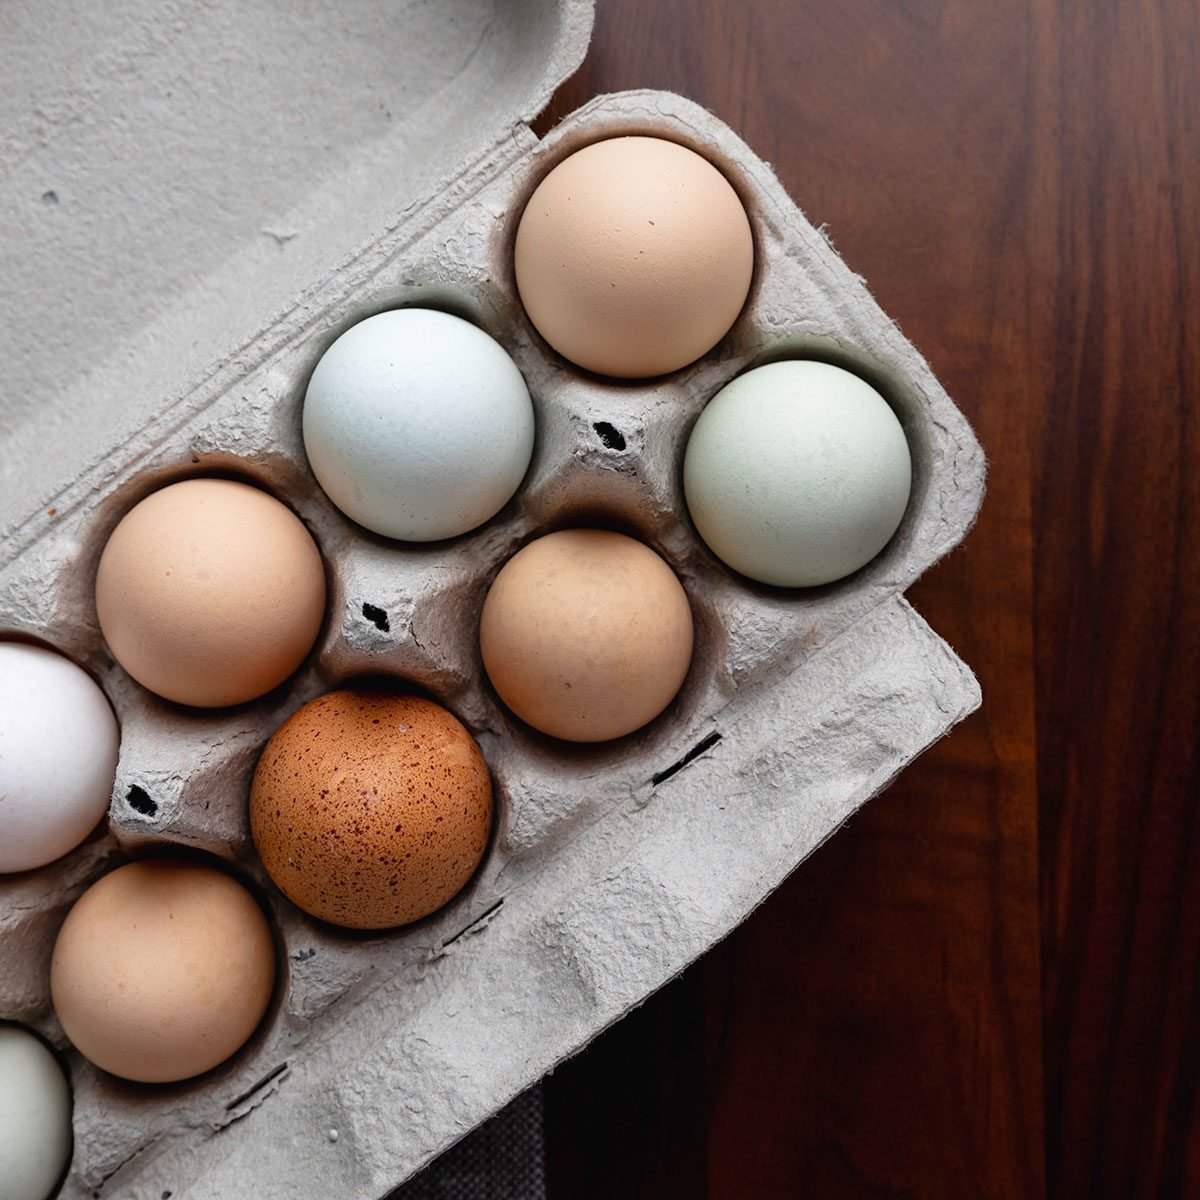 https://www.tasteofhome.com/wp-content/uploads/2021/02/Youve-Been-Storing-Your-Eggs-All-Wrong%E2%80%94Heres-the-RIGHT-Way_GettyImages-1214748747_FT.jpg